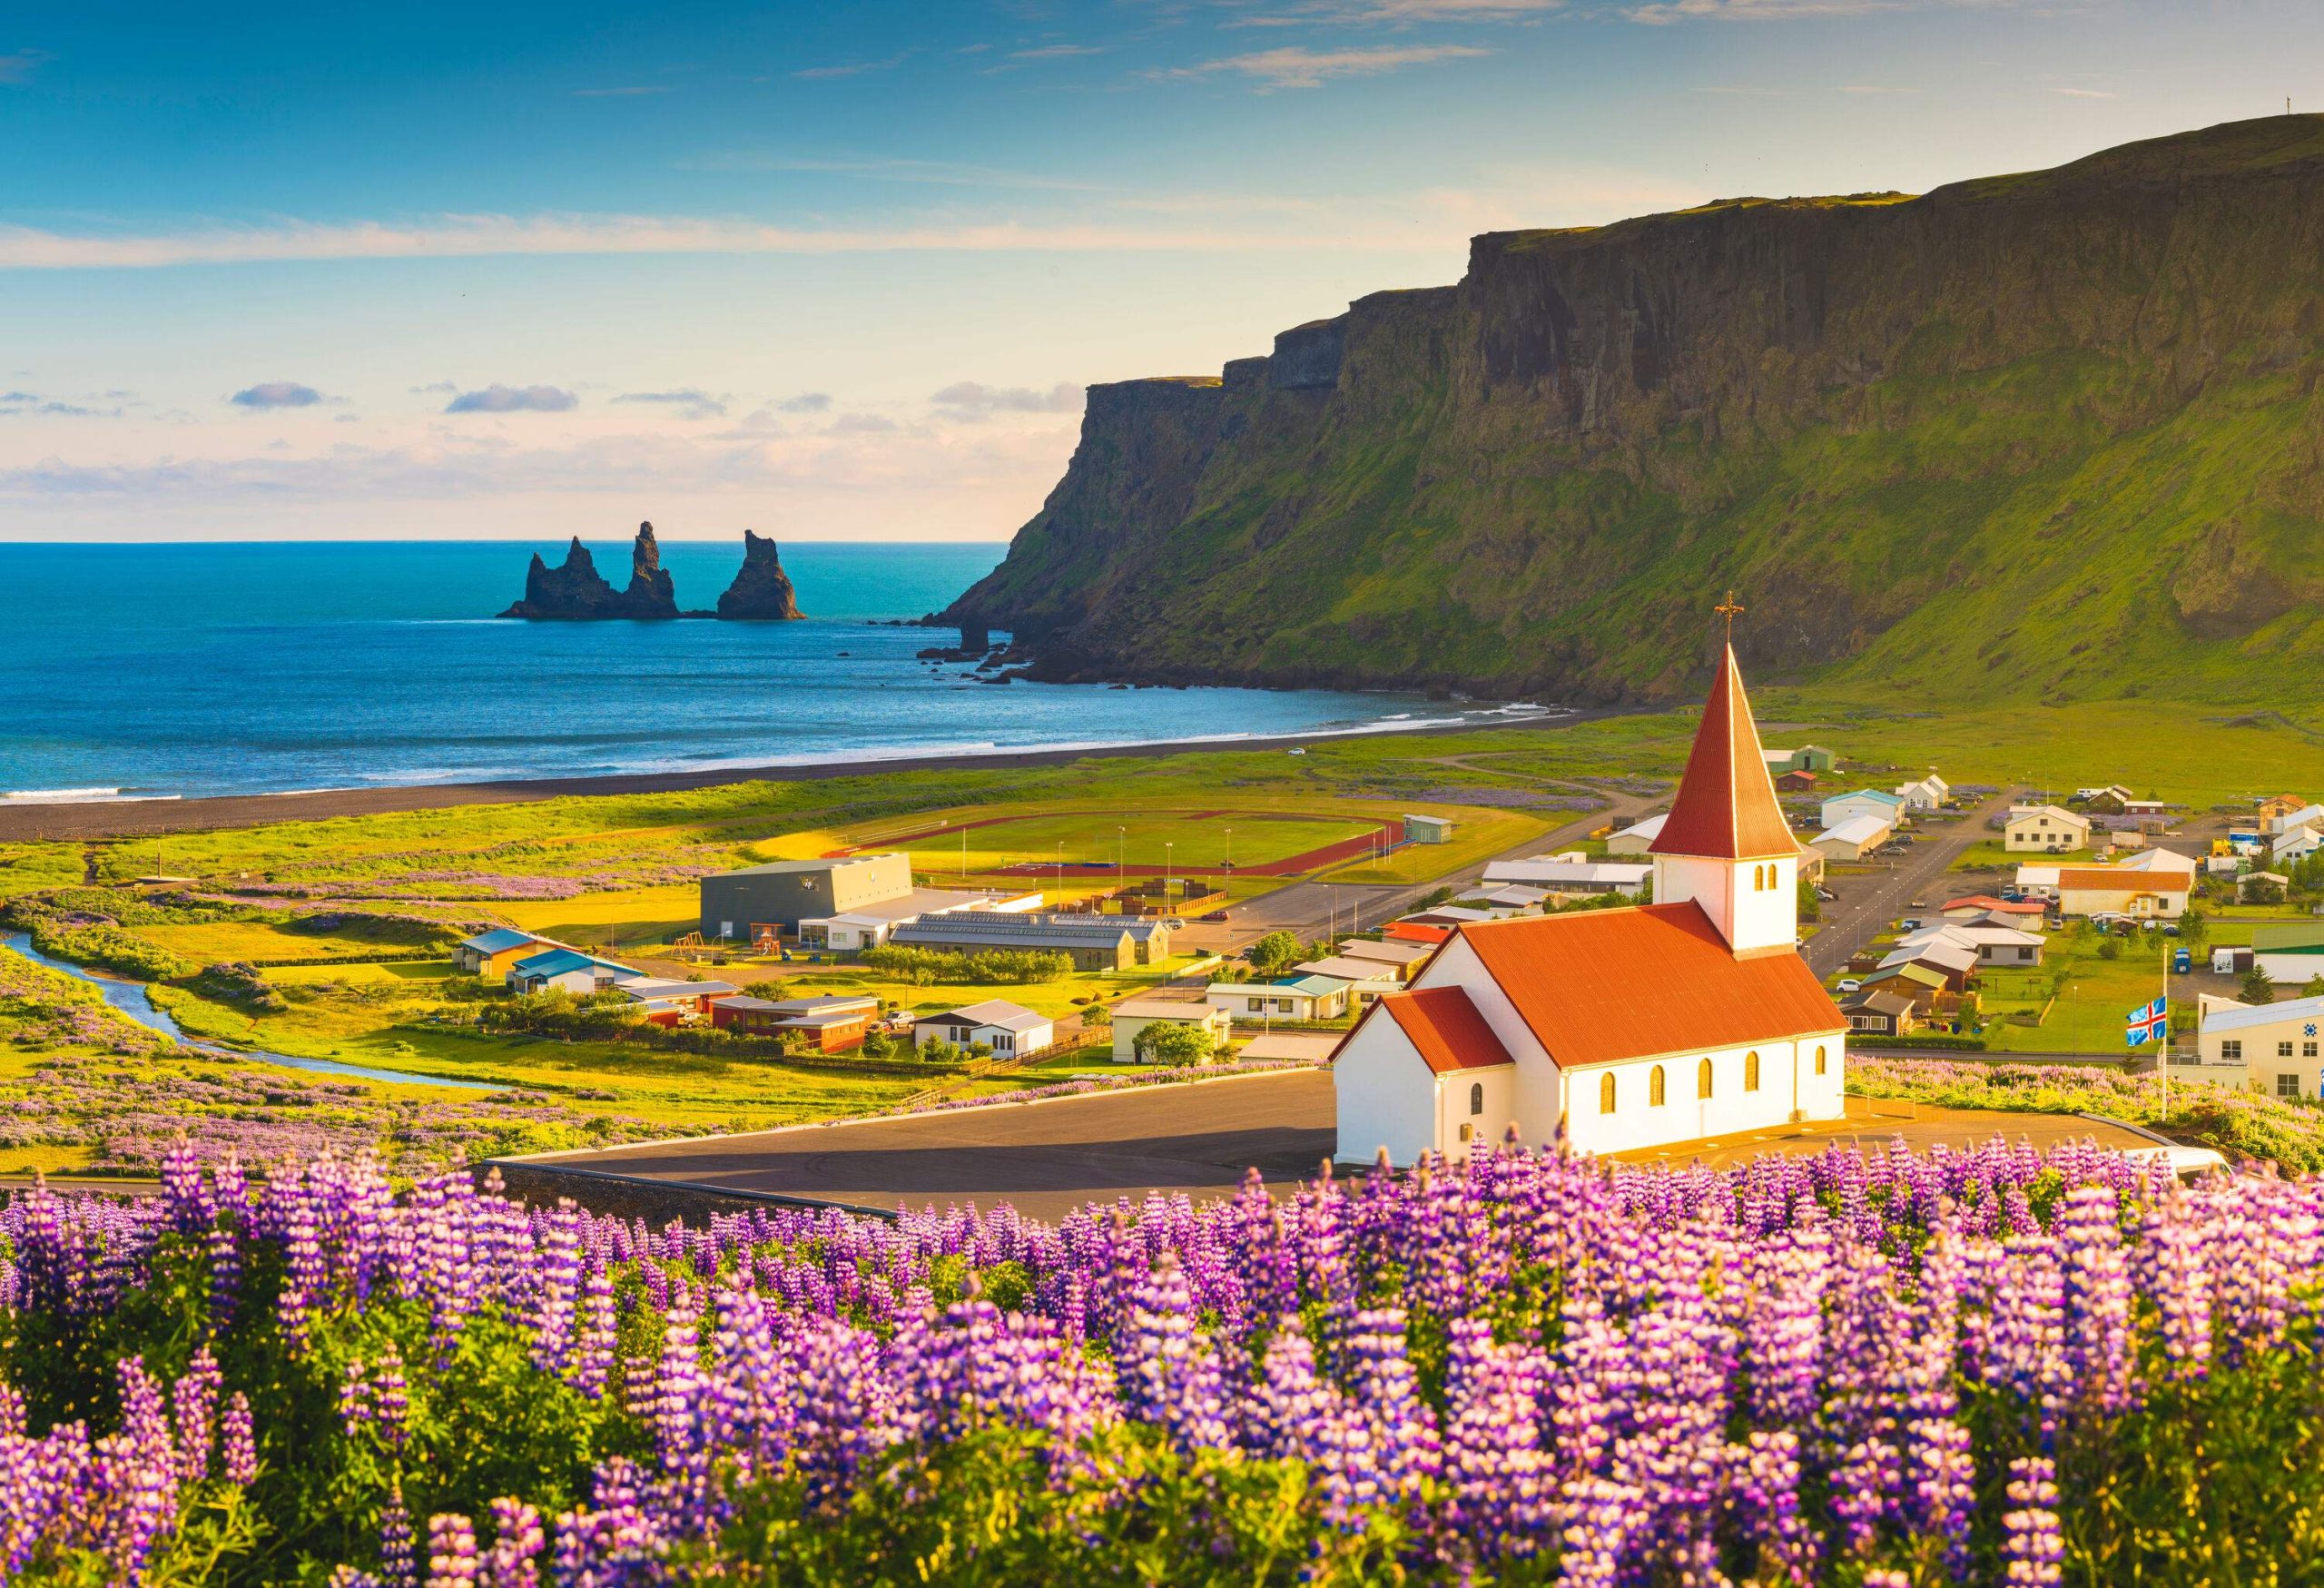 Fields of vibrant purple lupins bloom in the foreground, with a quaint town church and the shimmering sea beyond, all surrounded by steep green cliffs towering in the background.